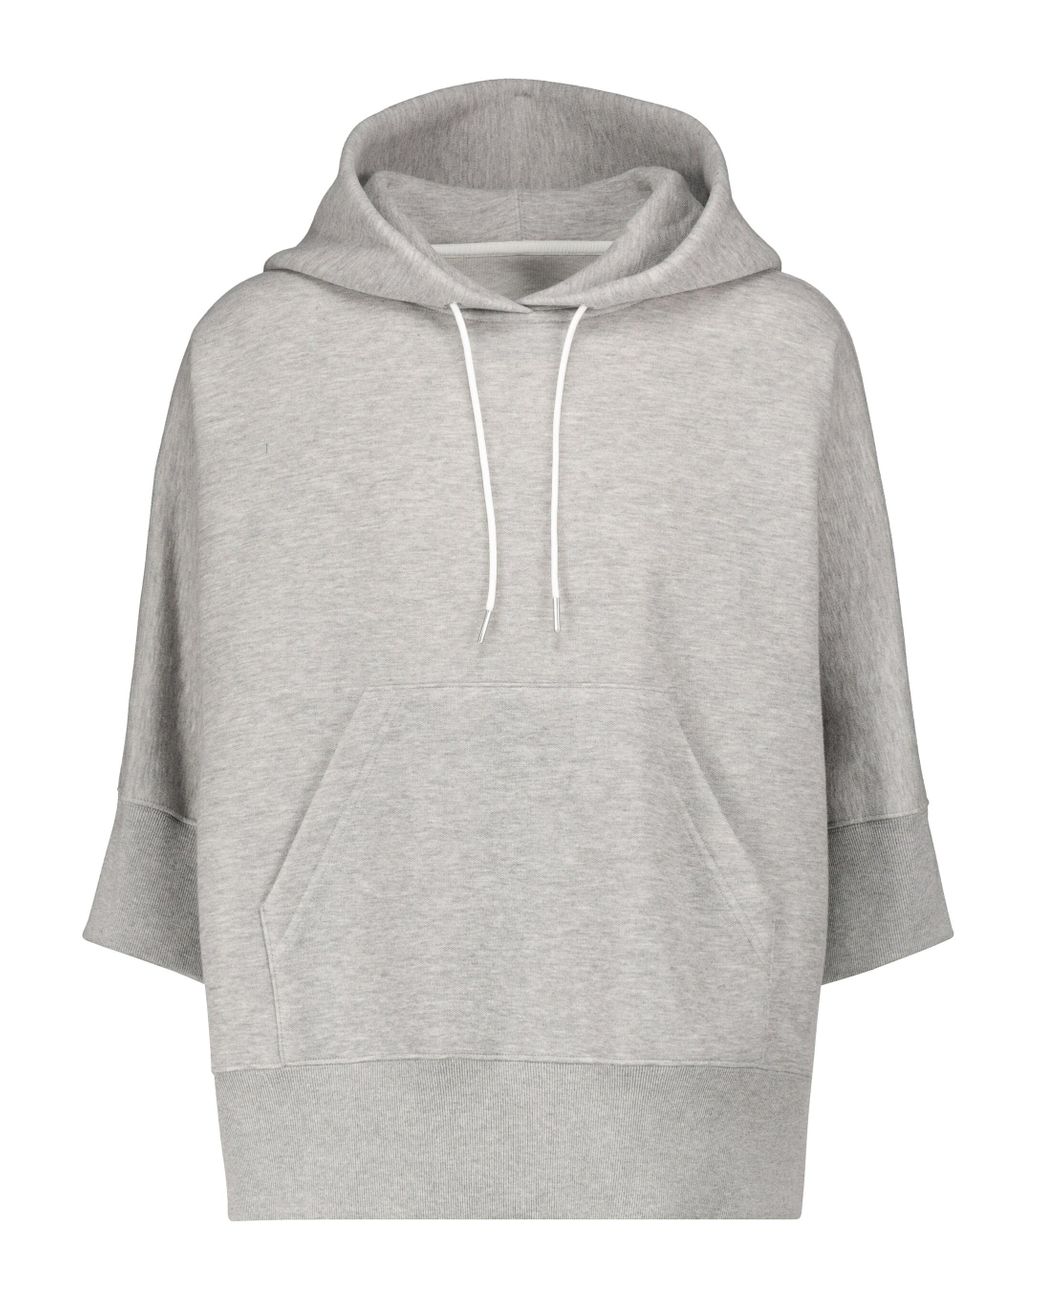 Sacai Cotton-blend Hoodie in Grey (Gray) - Lyst